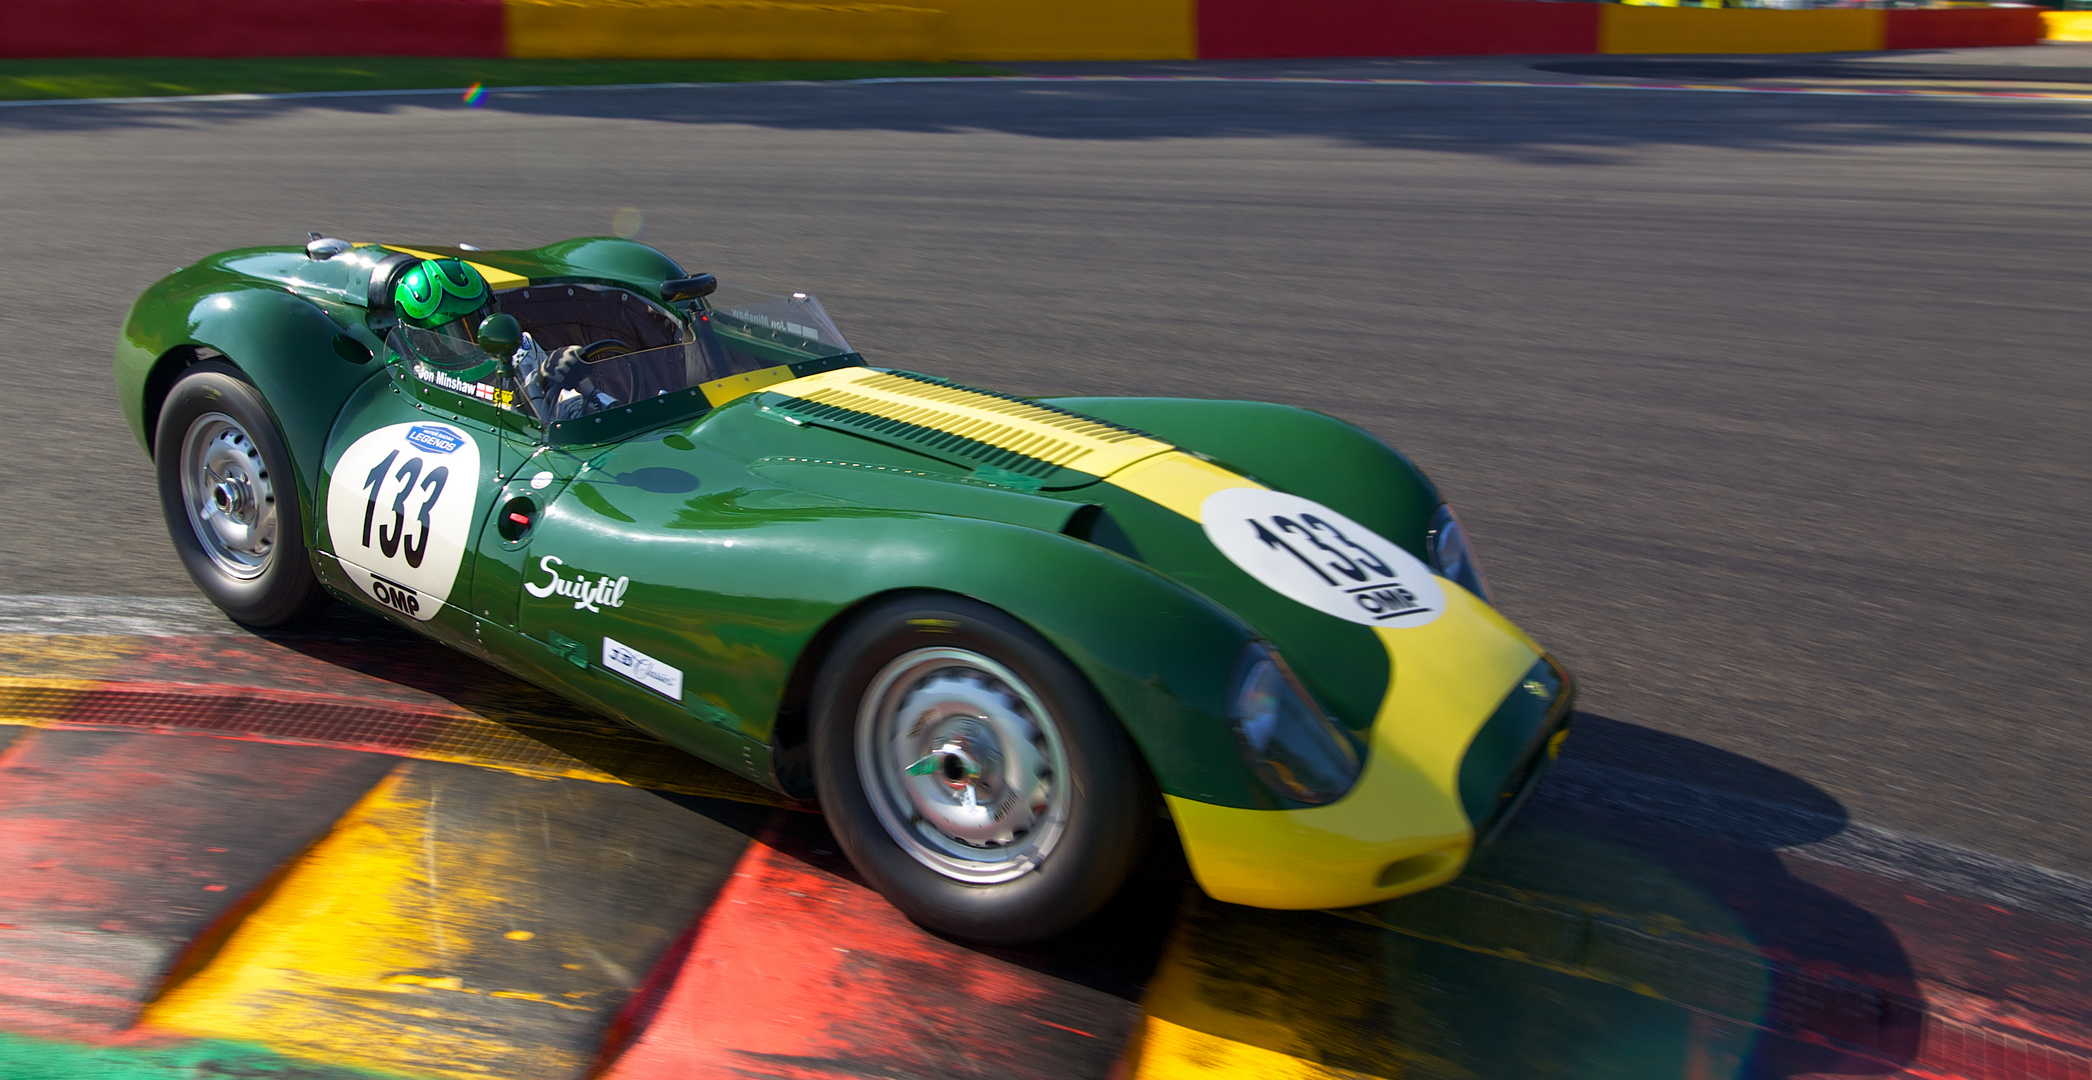 Knobbly Lister with Suixtil colors....